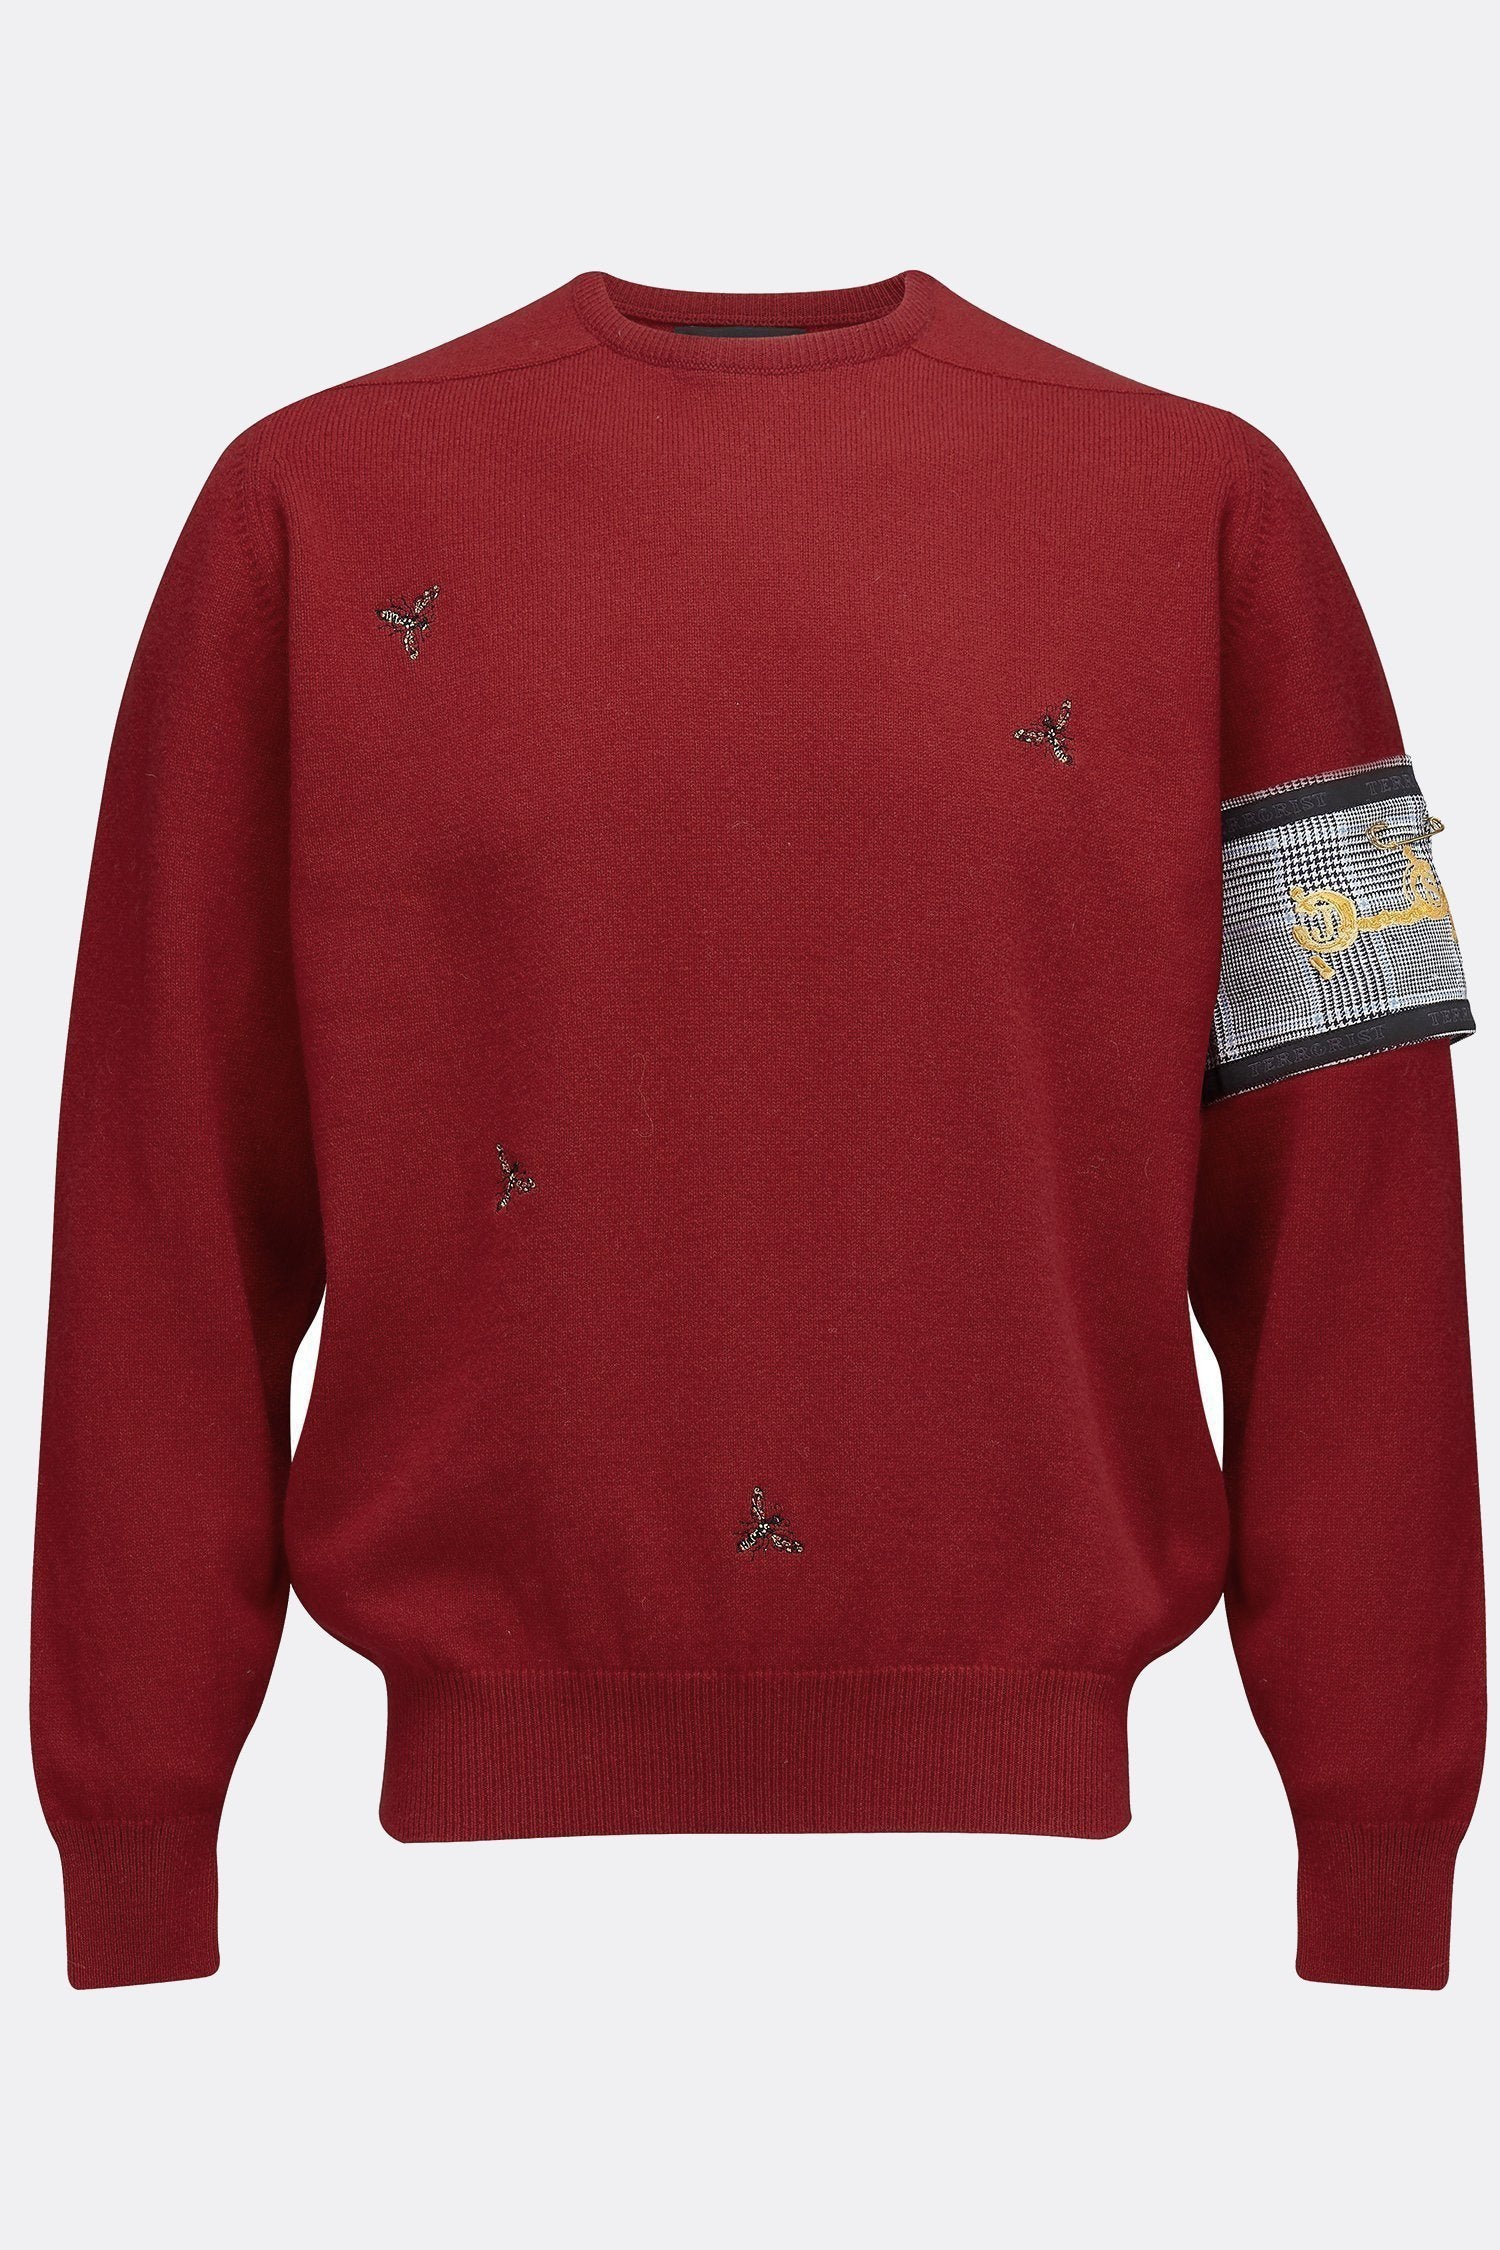 WASP JUMPER - CHERRY-menswear-A Child Of The Jago